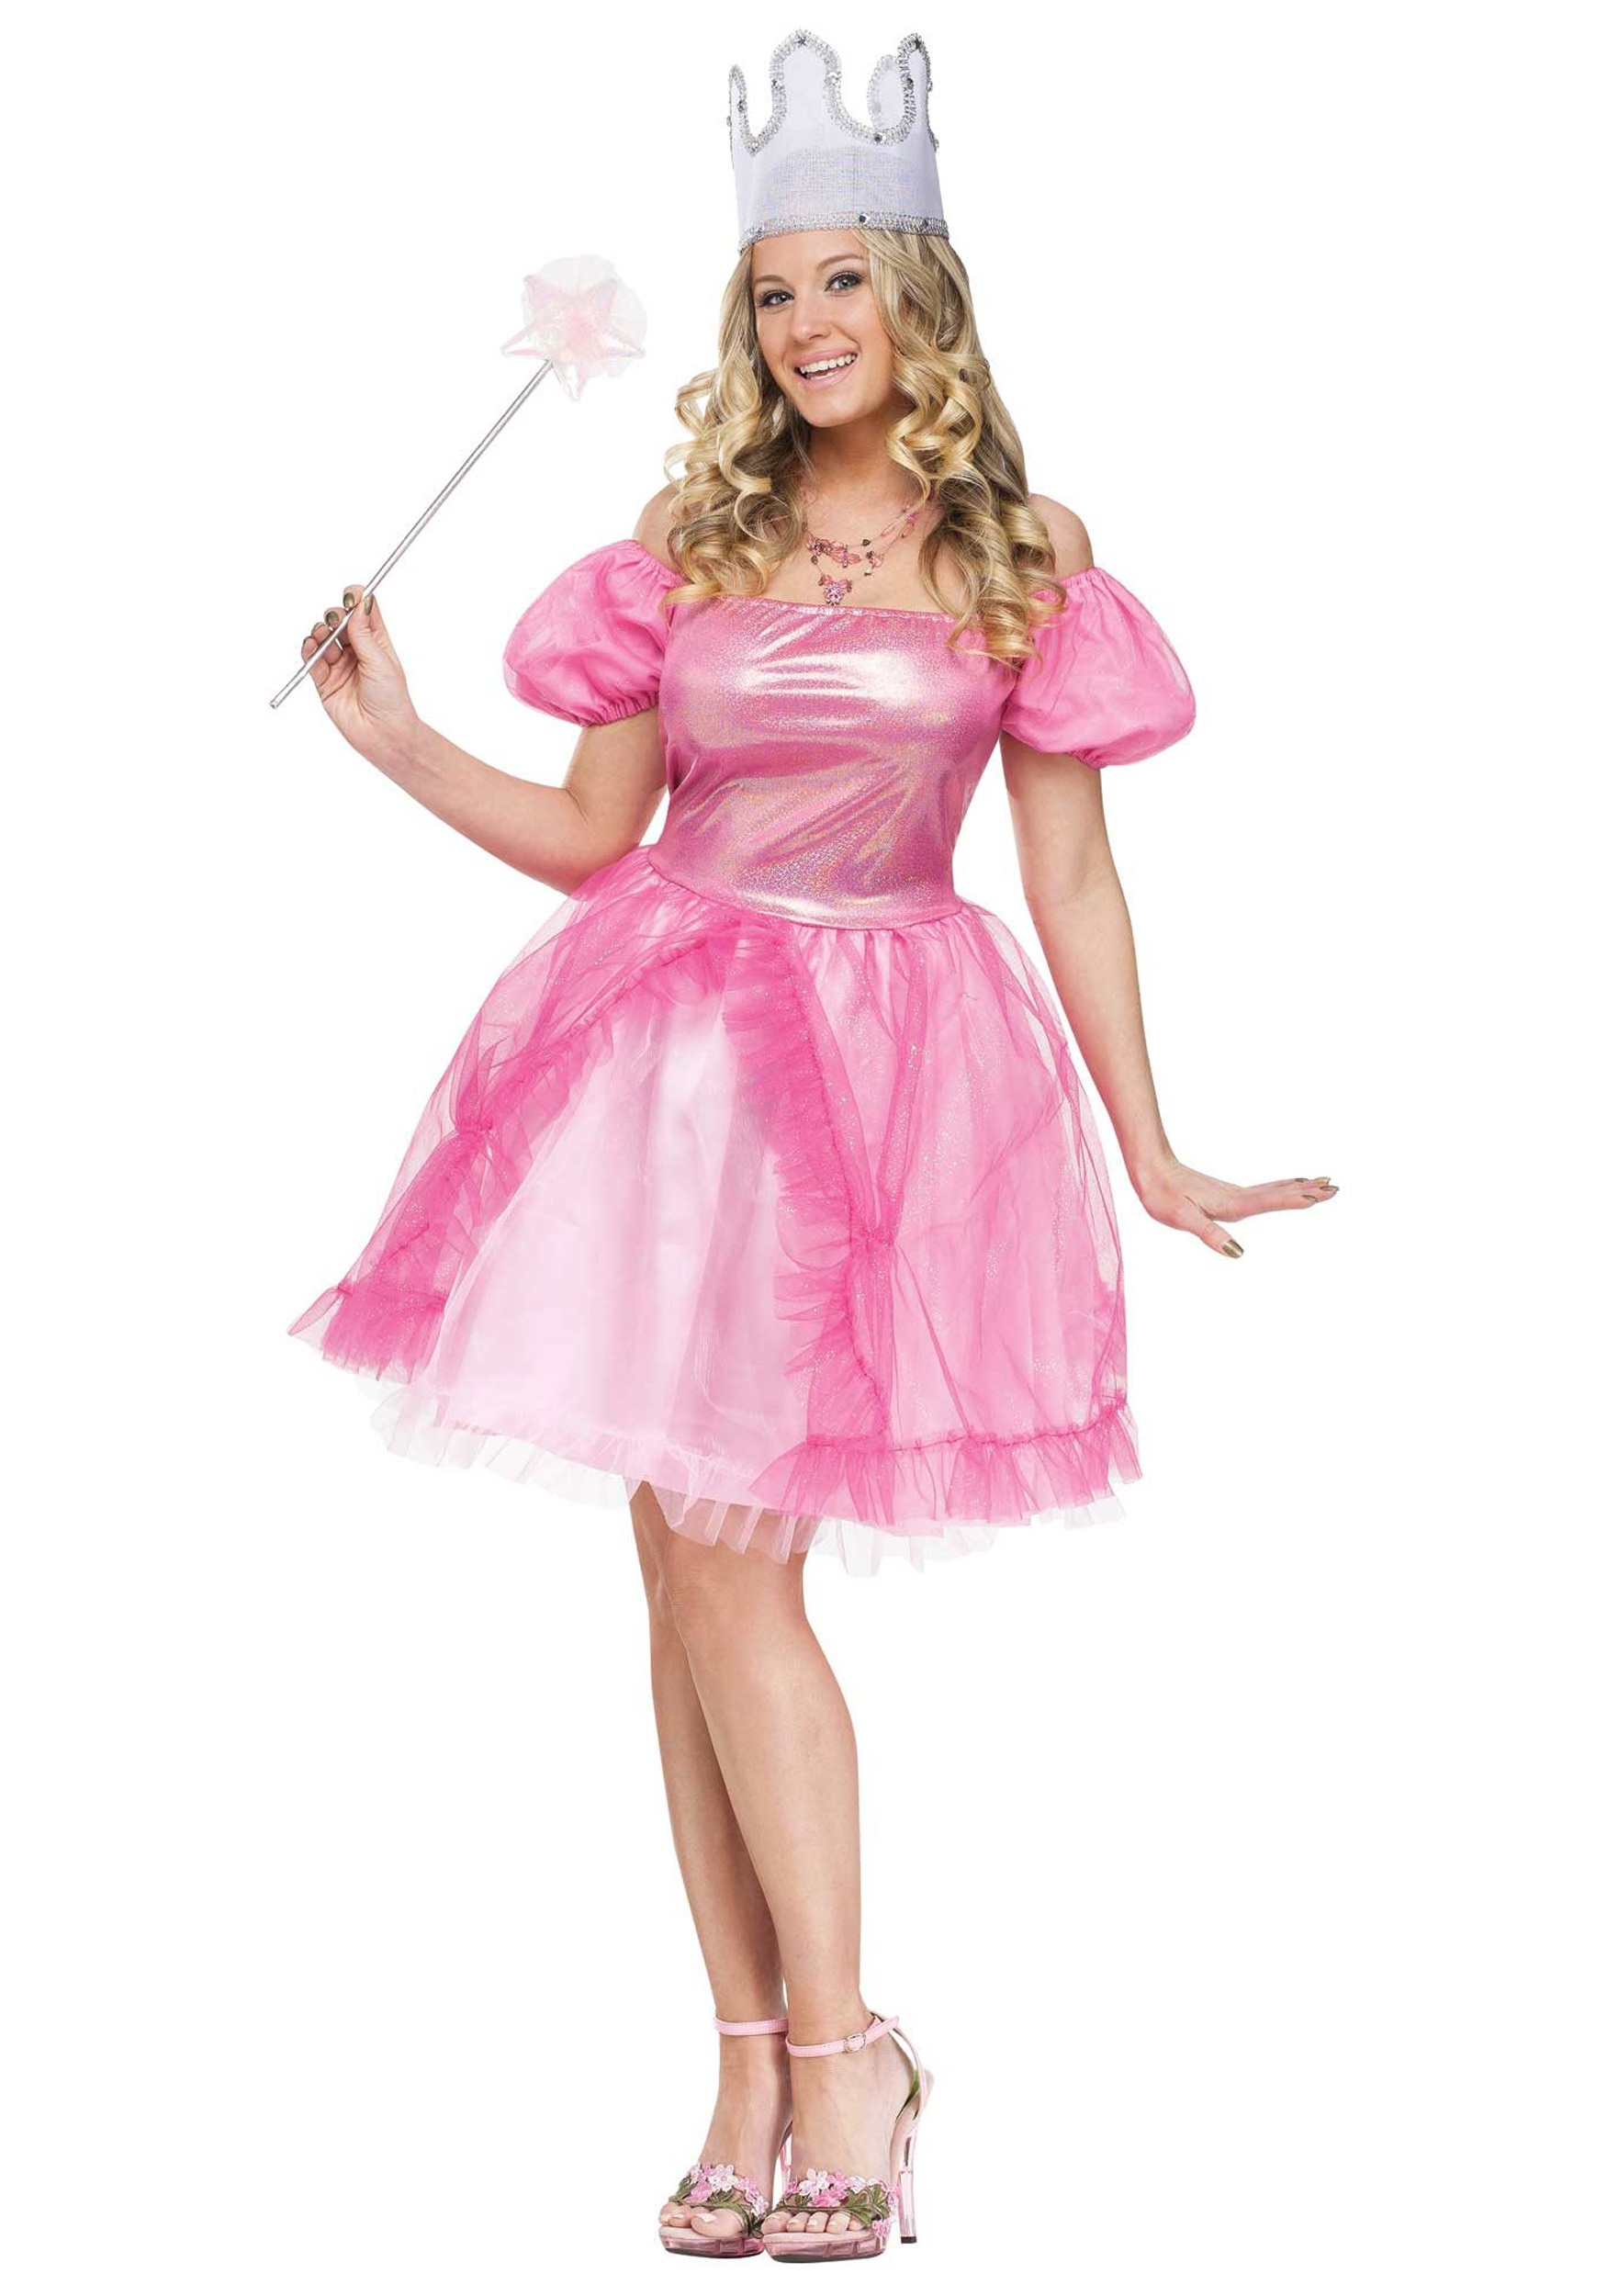 and sending Dorothy down the yellow brick road, be sure you’re wearing this...